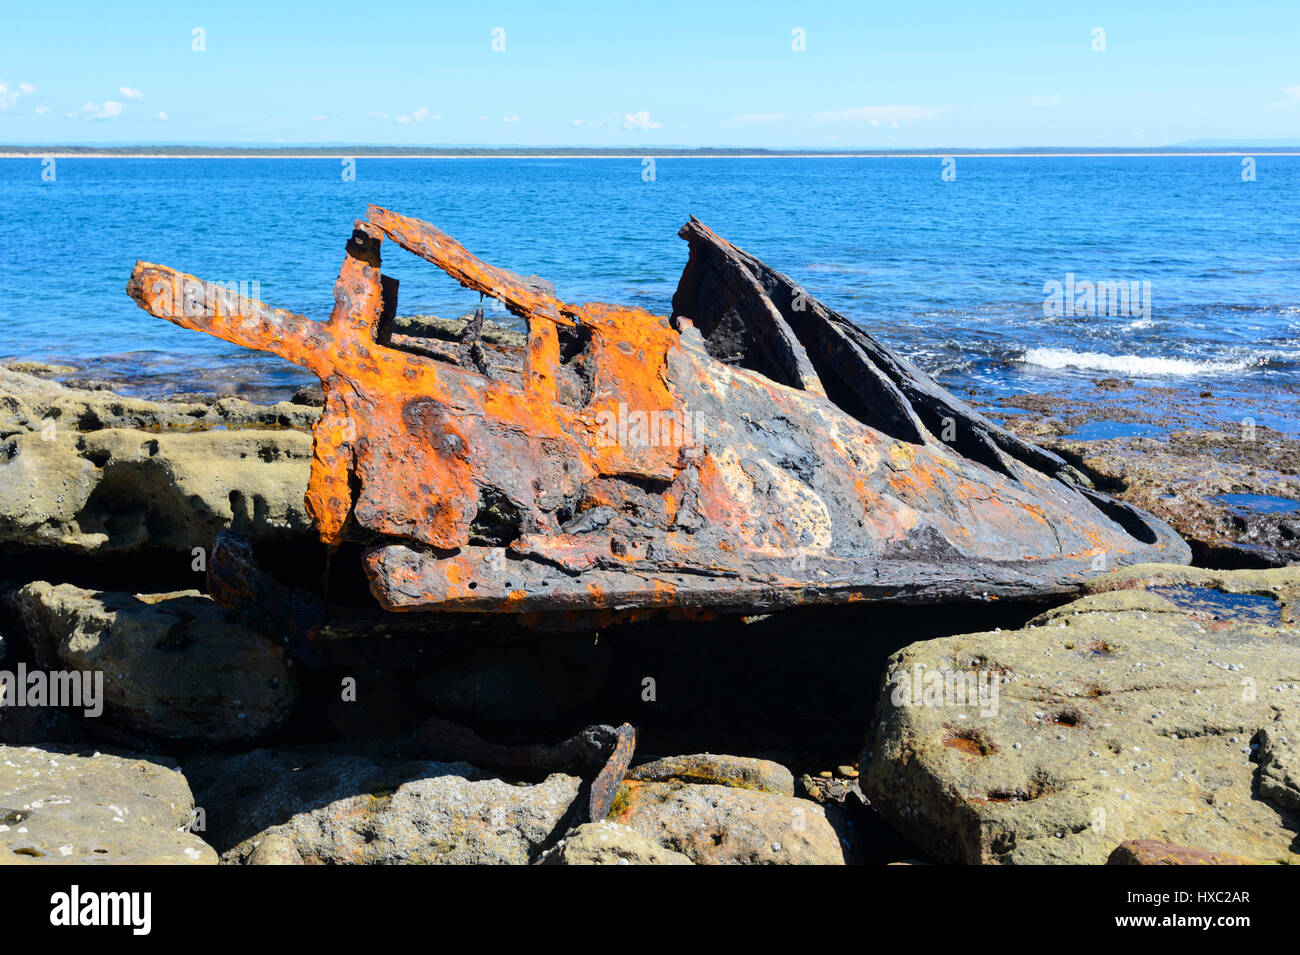 Remains of the steamship SS Merimbula which ran aground at Whale Point in 1928, Currarong, Beecroft Peninsula, Jervis Bay, New South Wales, Australia Stock Photo